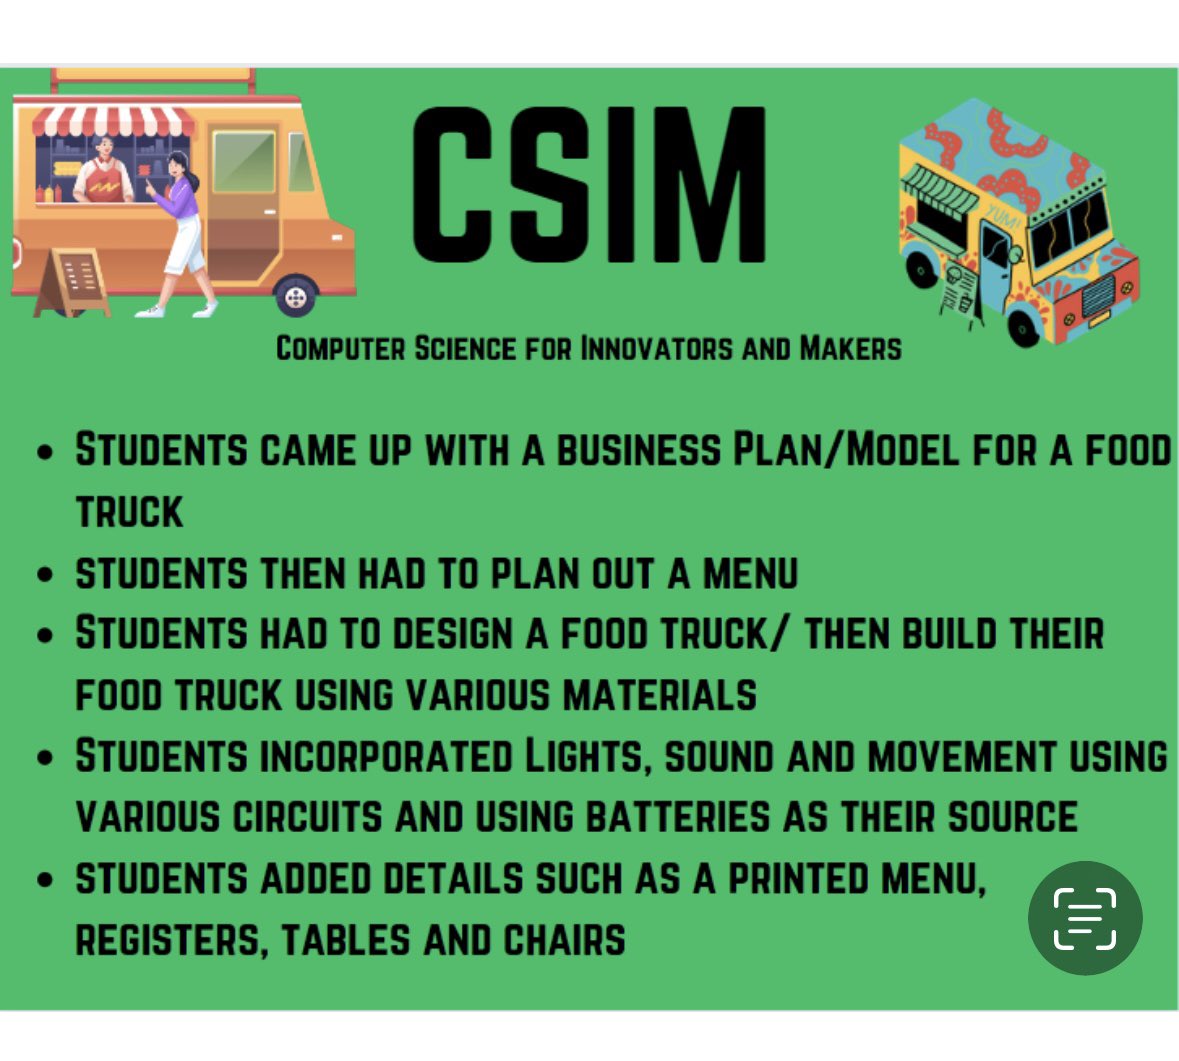 Ss in @jenladd #ComputerScience classes made the coolest food trucks using a business plan, recycled materials and their creativity and imagination! They are currently on display in the iCenter 🤩 #CSIM #Innovation @aquinn123 @Long_WBStronger #onlywb @wbloomfieldschl